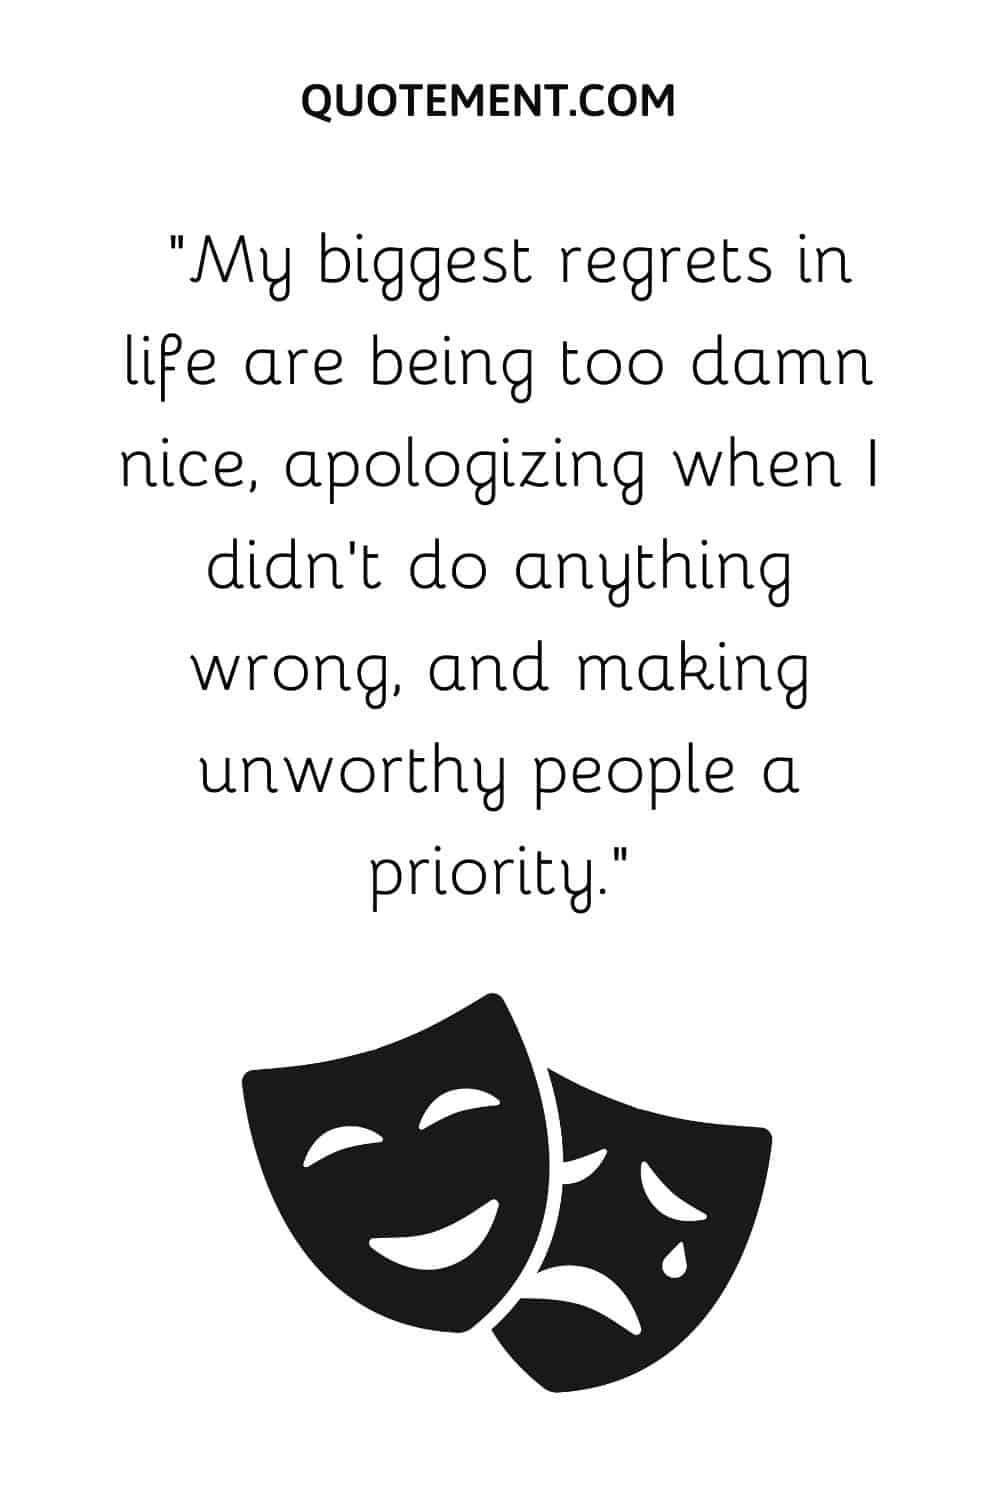 My biggest regrets in life are being too damn nice, apologizing when I didn’t do anything wrong, and making unworthy people a priority.